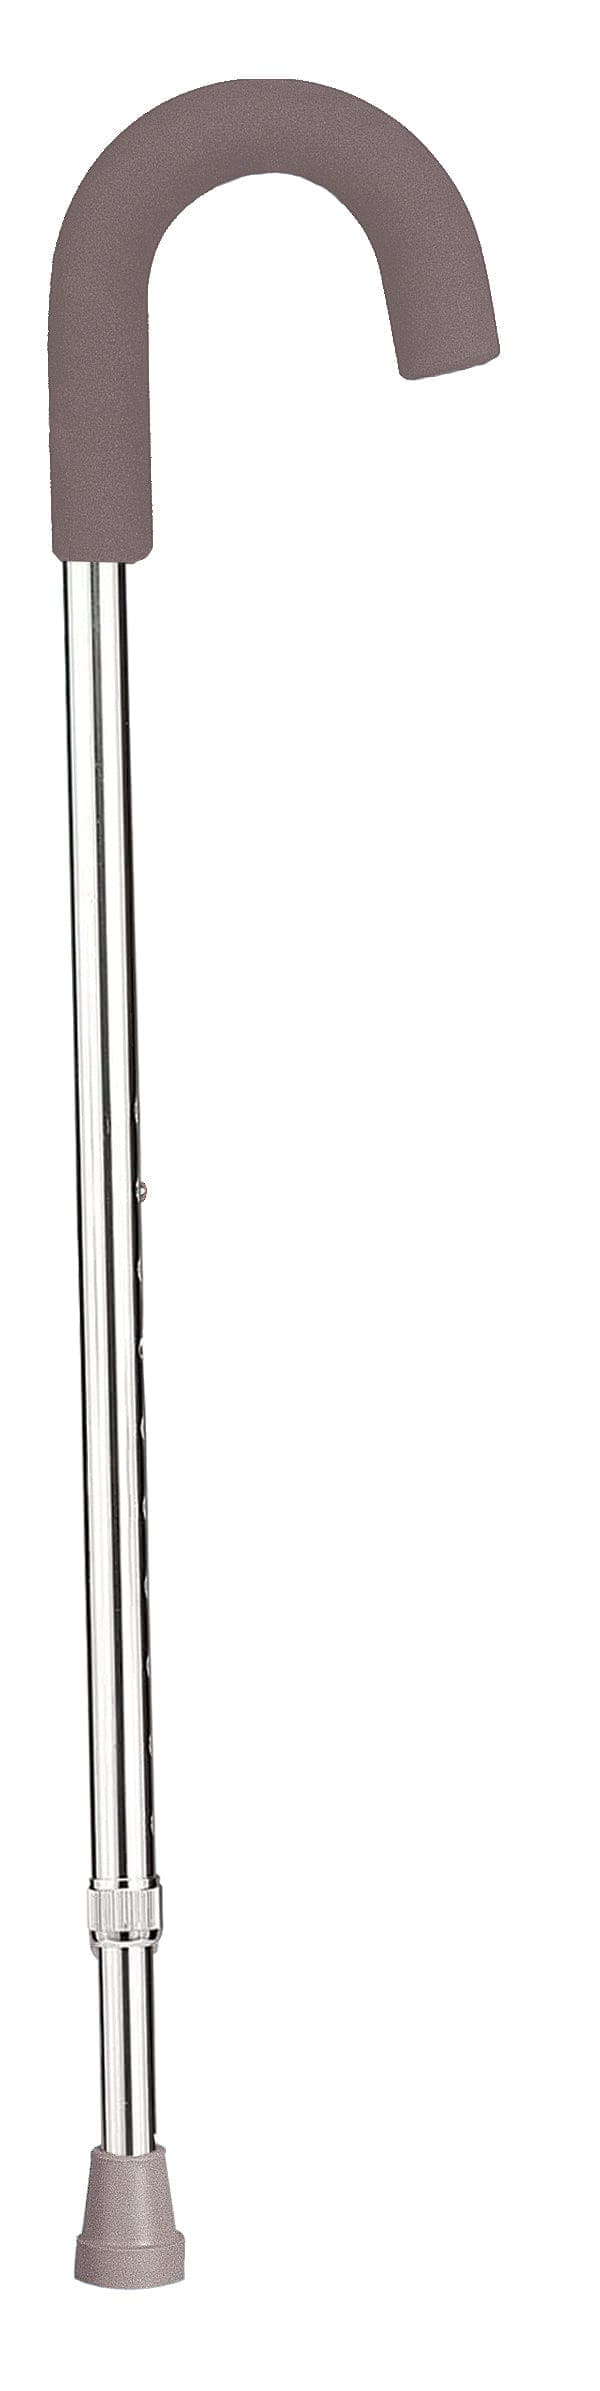 Drive Medical Drive Medical Aluminum Round Handle Cane with Foam Grip rtl10342